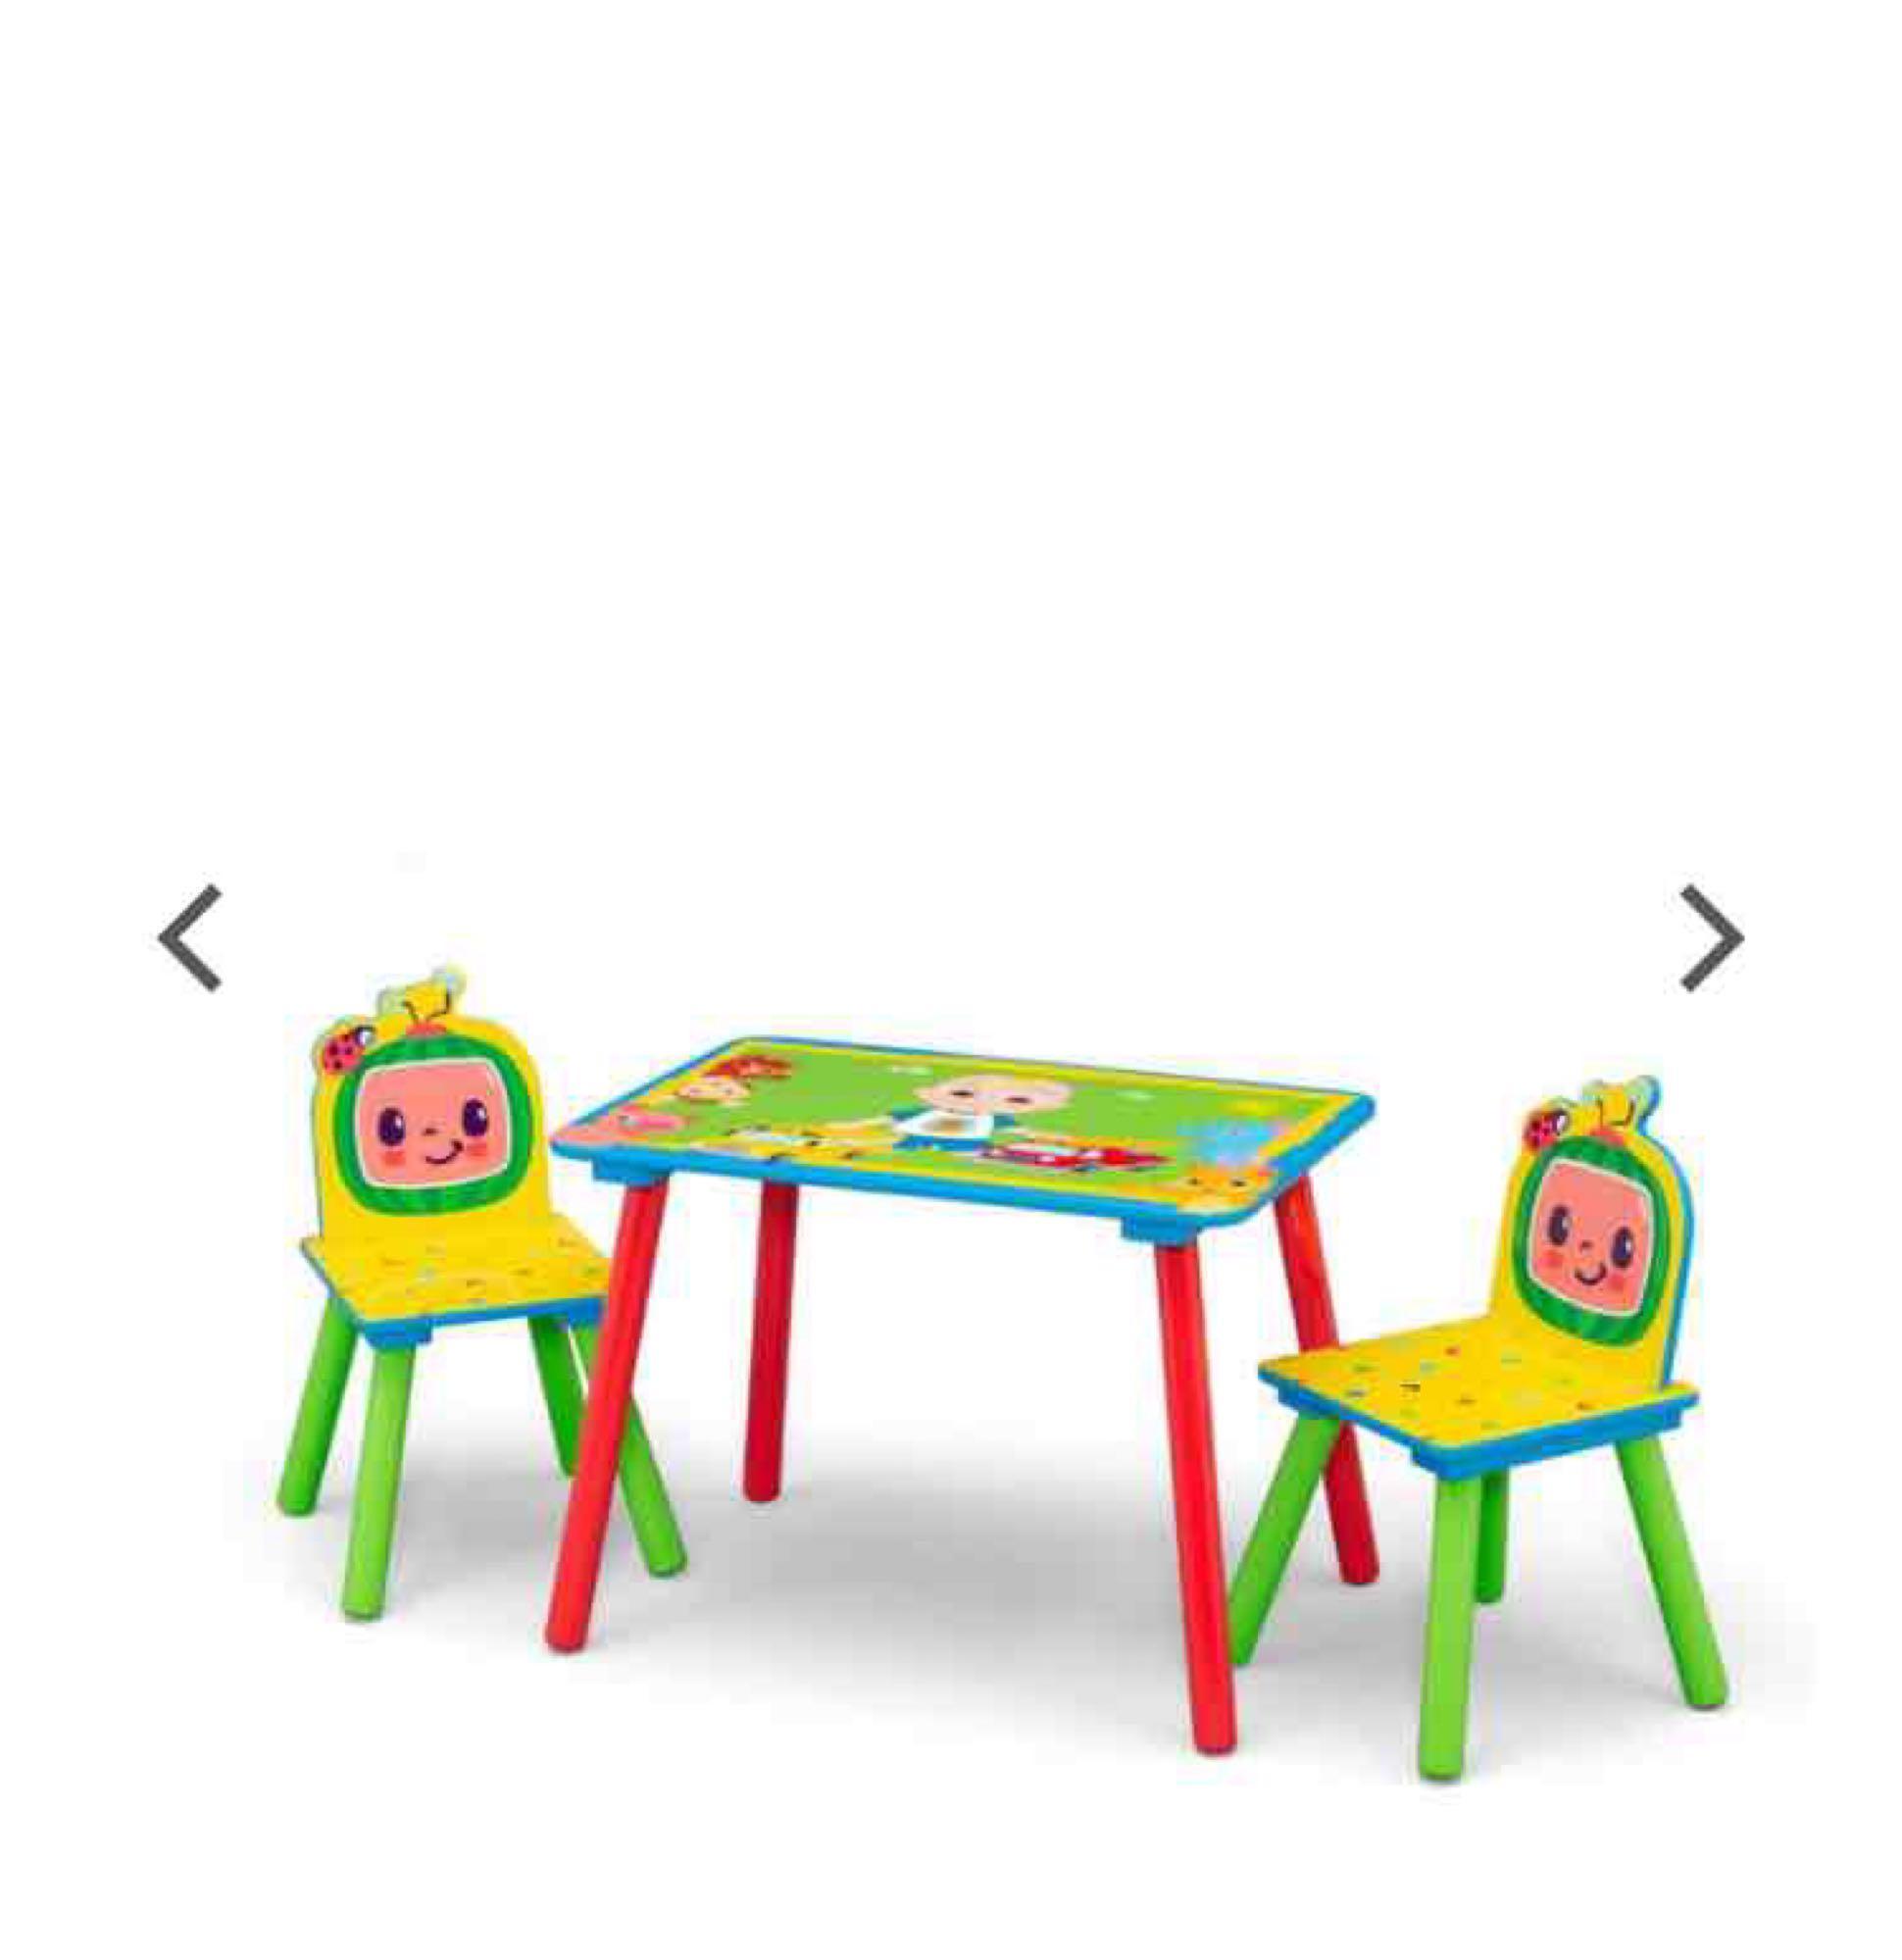 CoComelon 4-Piece Toddler Playroom Set by Delta Children ? Includes Play Table with Dry Erase